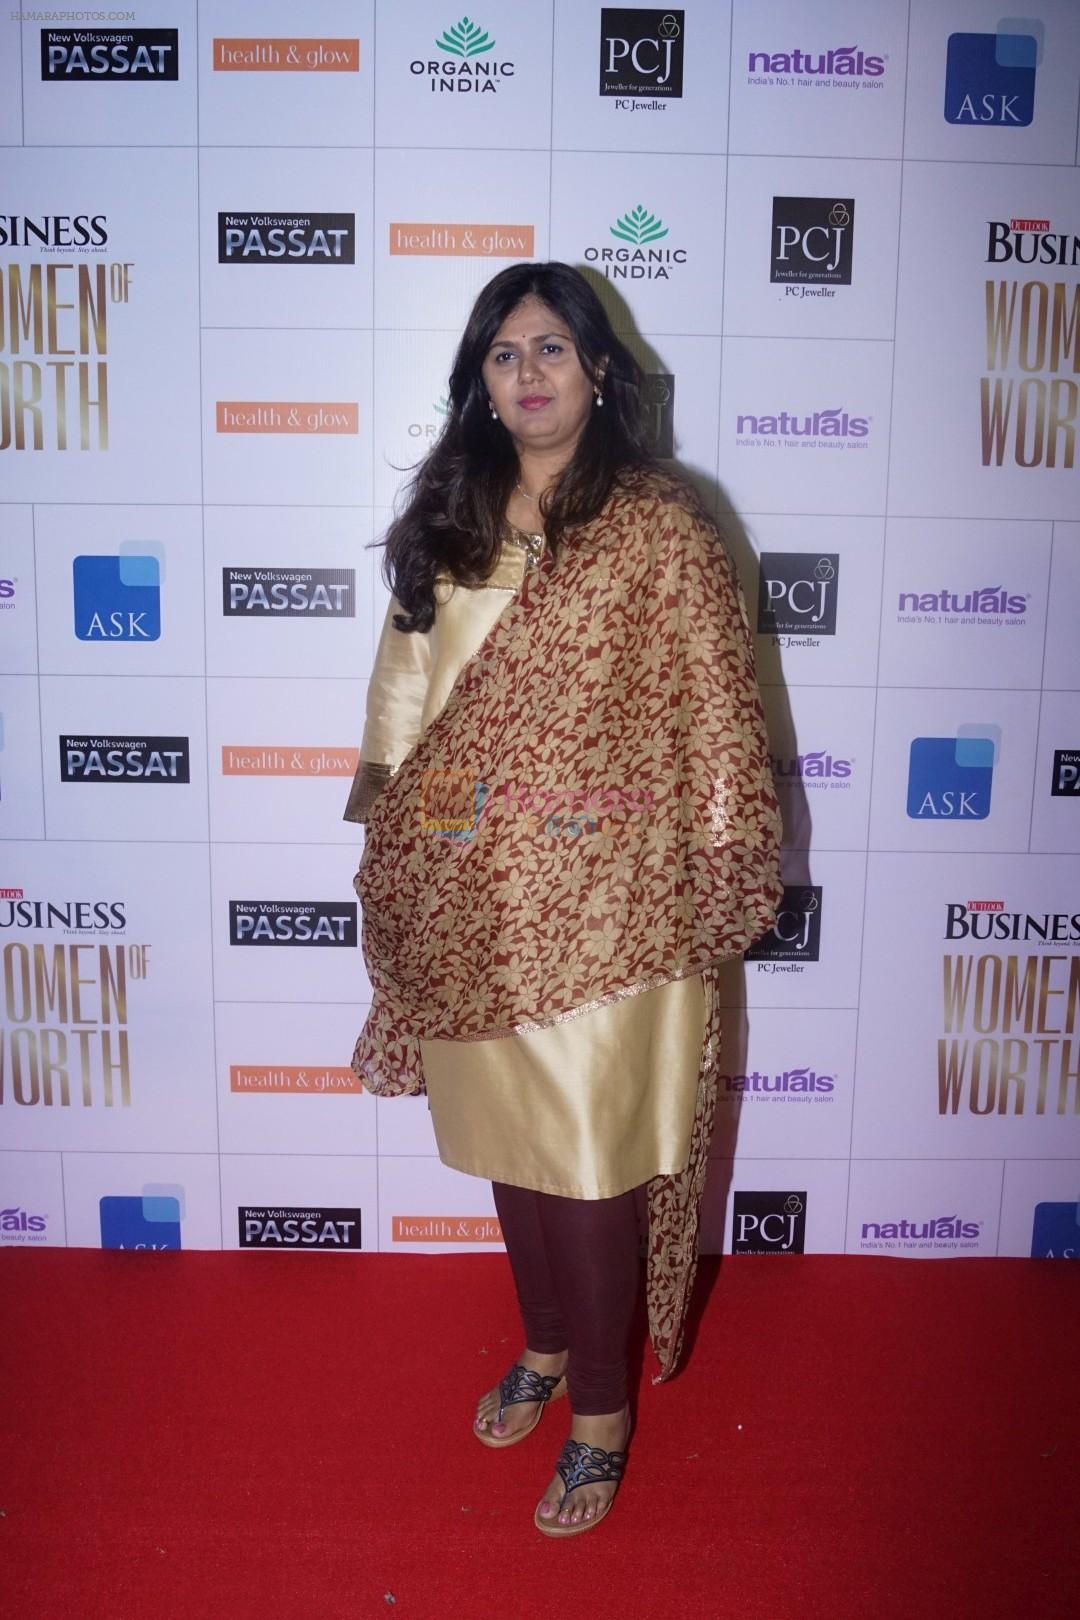 At The Outlook Business Women Of Worth Awards 2017 on 10th Nov 2017